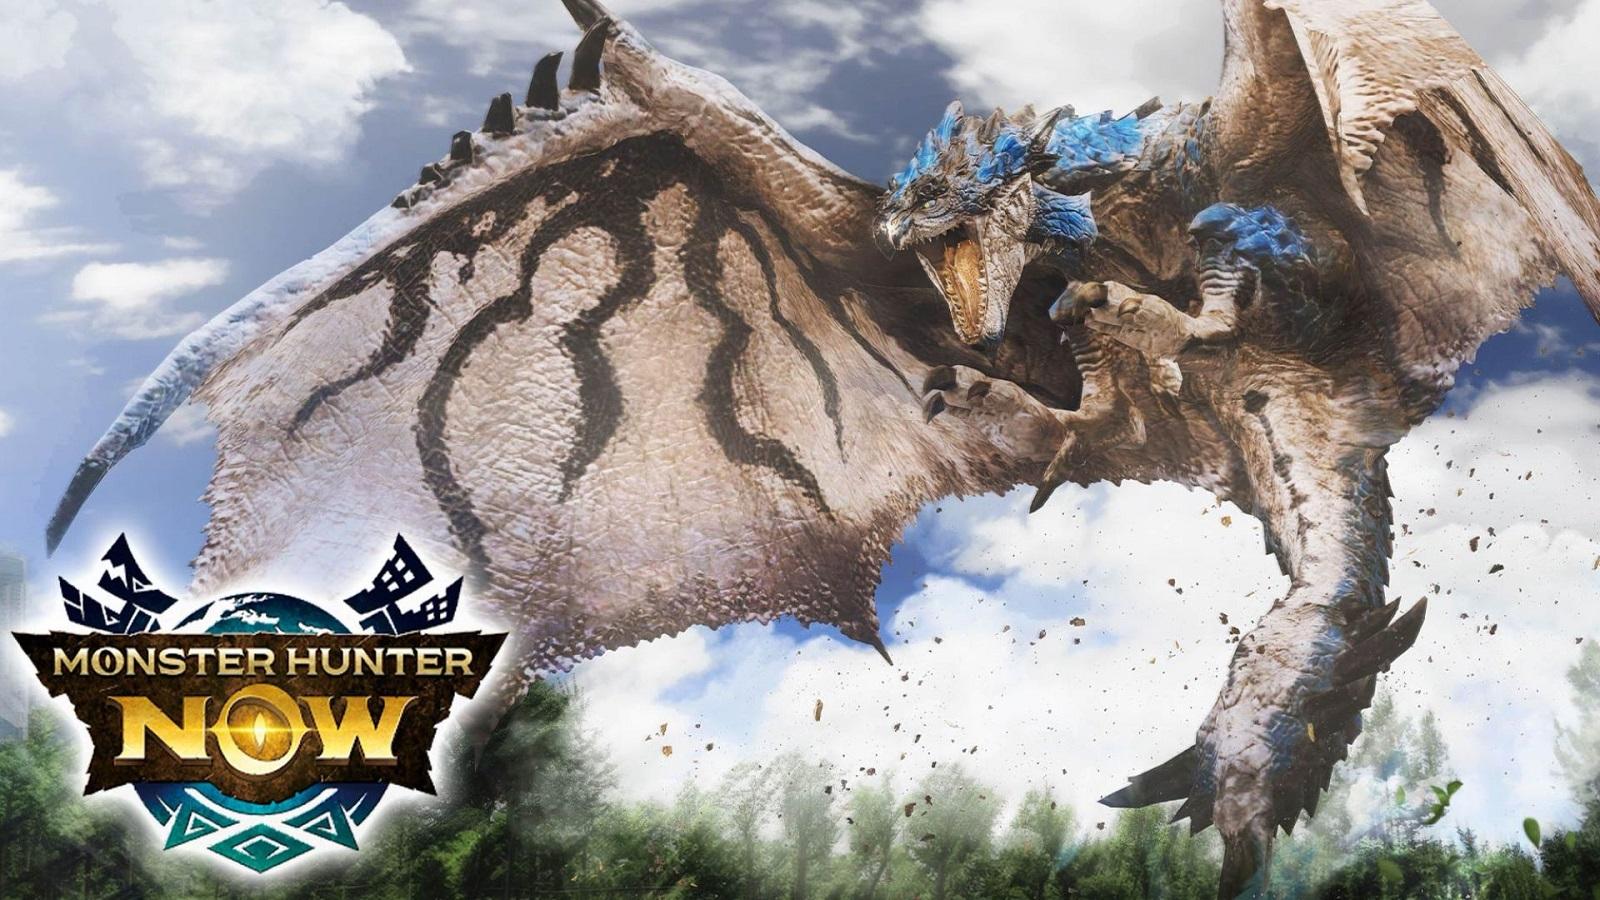 Azure Rathalos flying above the trees